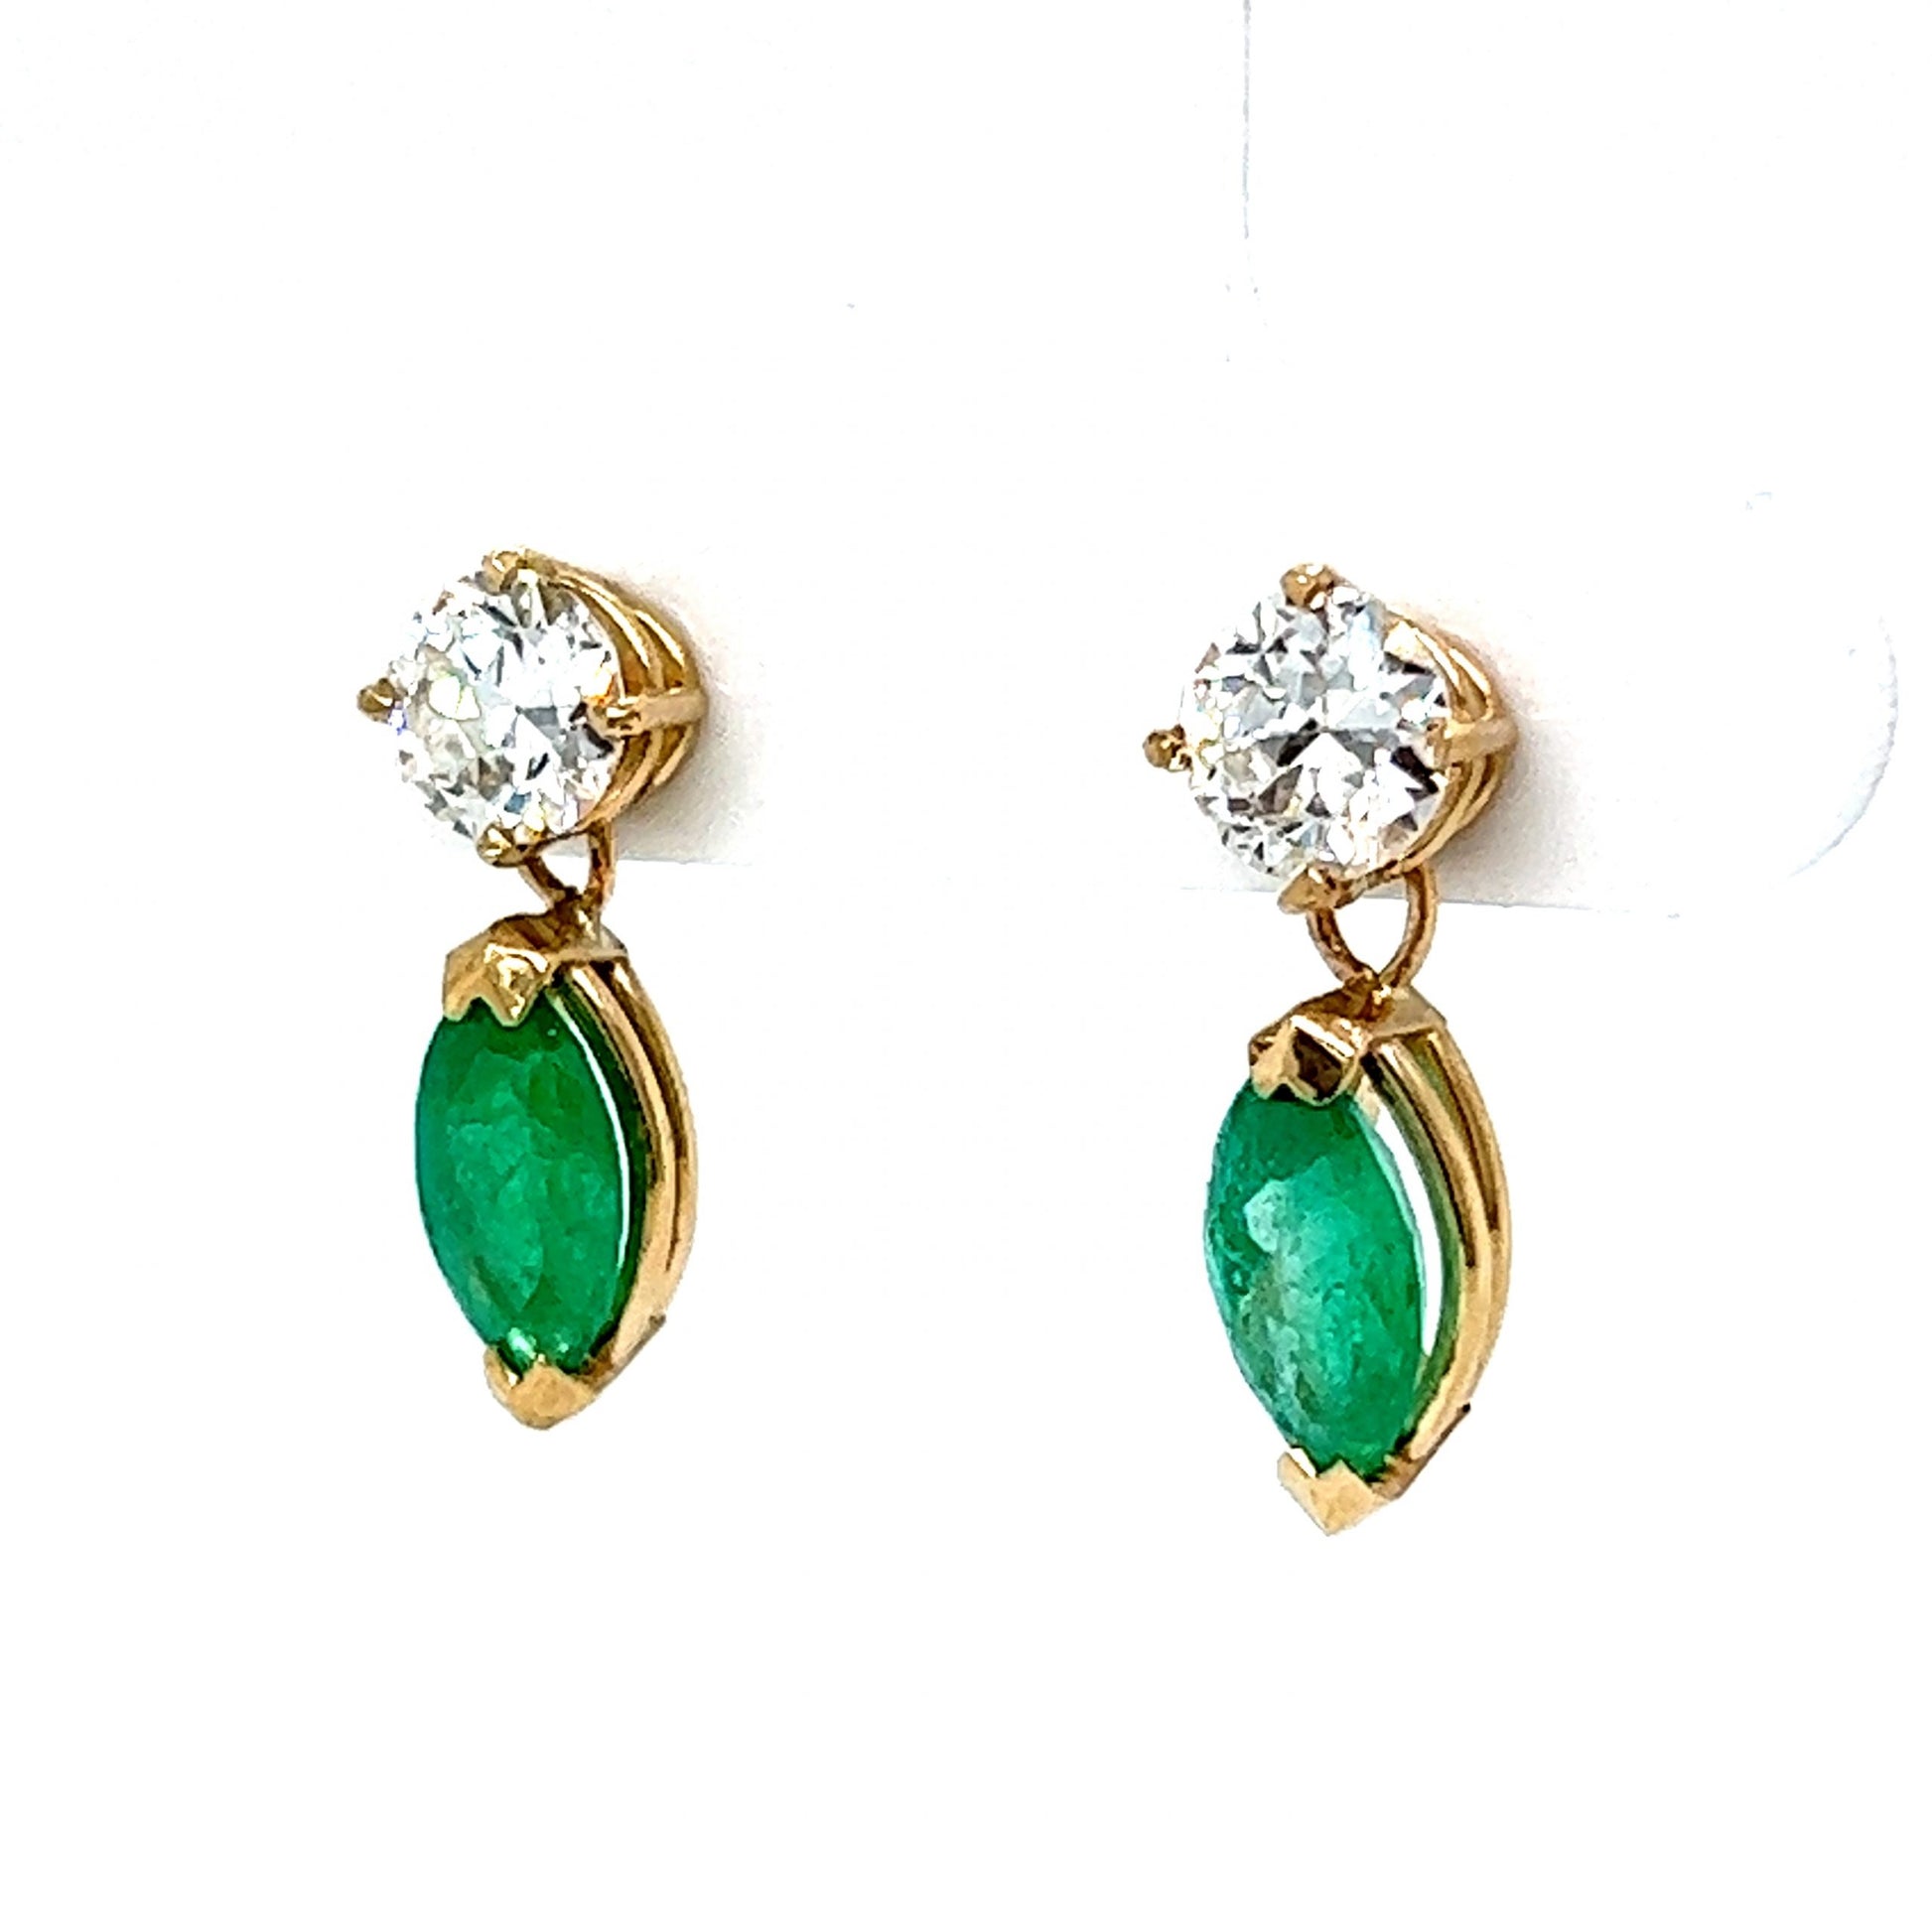 Diamond & Marquise Cut Emerald Earrings in 14k Yellow GoldComposition: 14 Karat Yellow GoldTotal Diamond Weight: 1.08 ctTotal Gram Weight: 2.0 gInscription: 14k